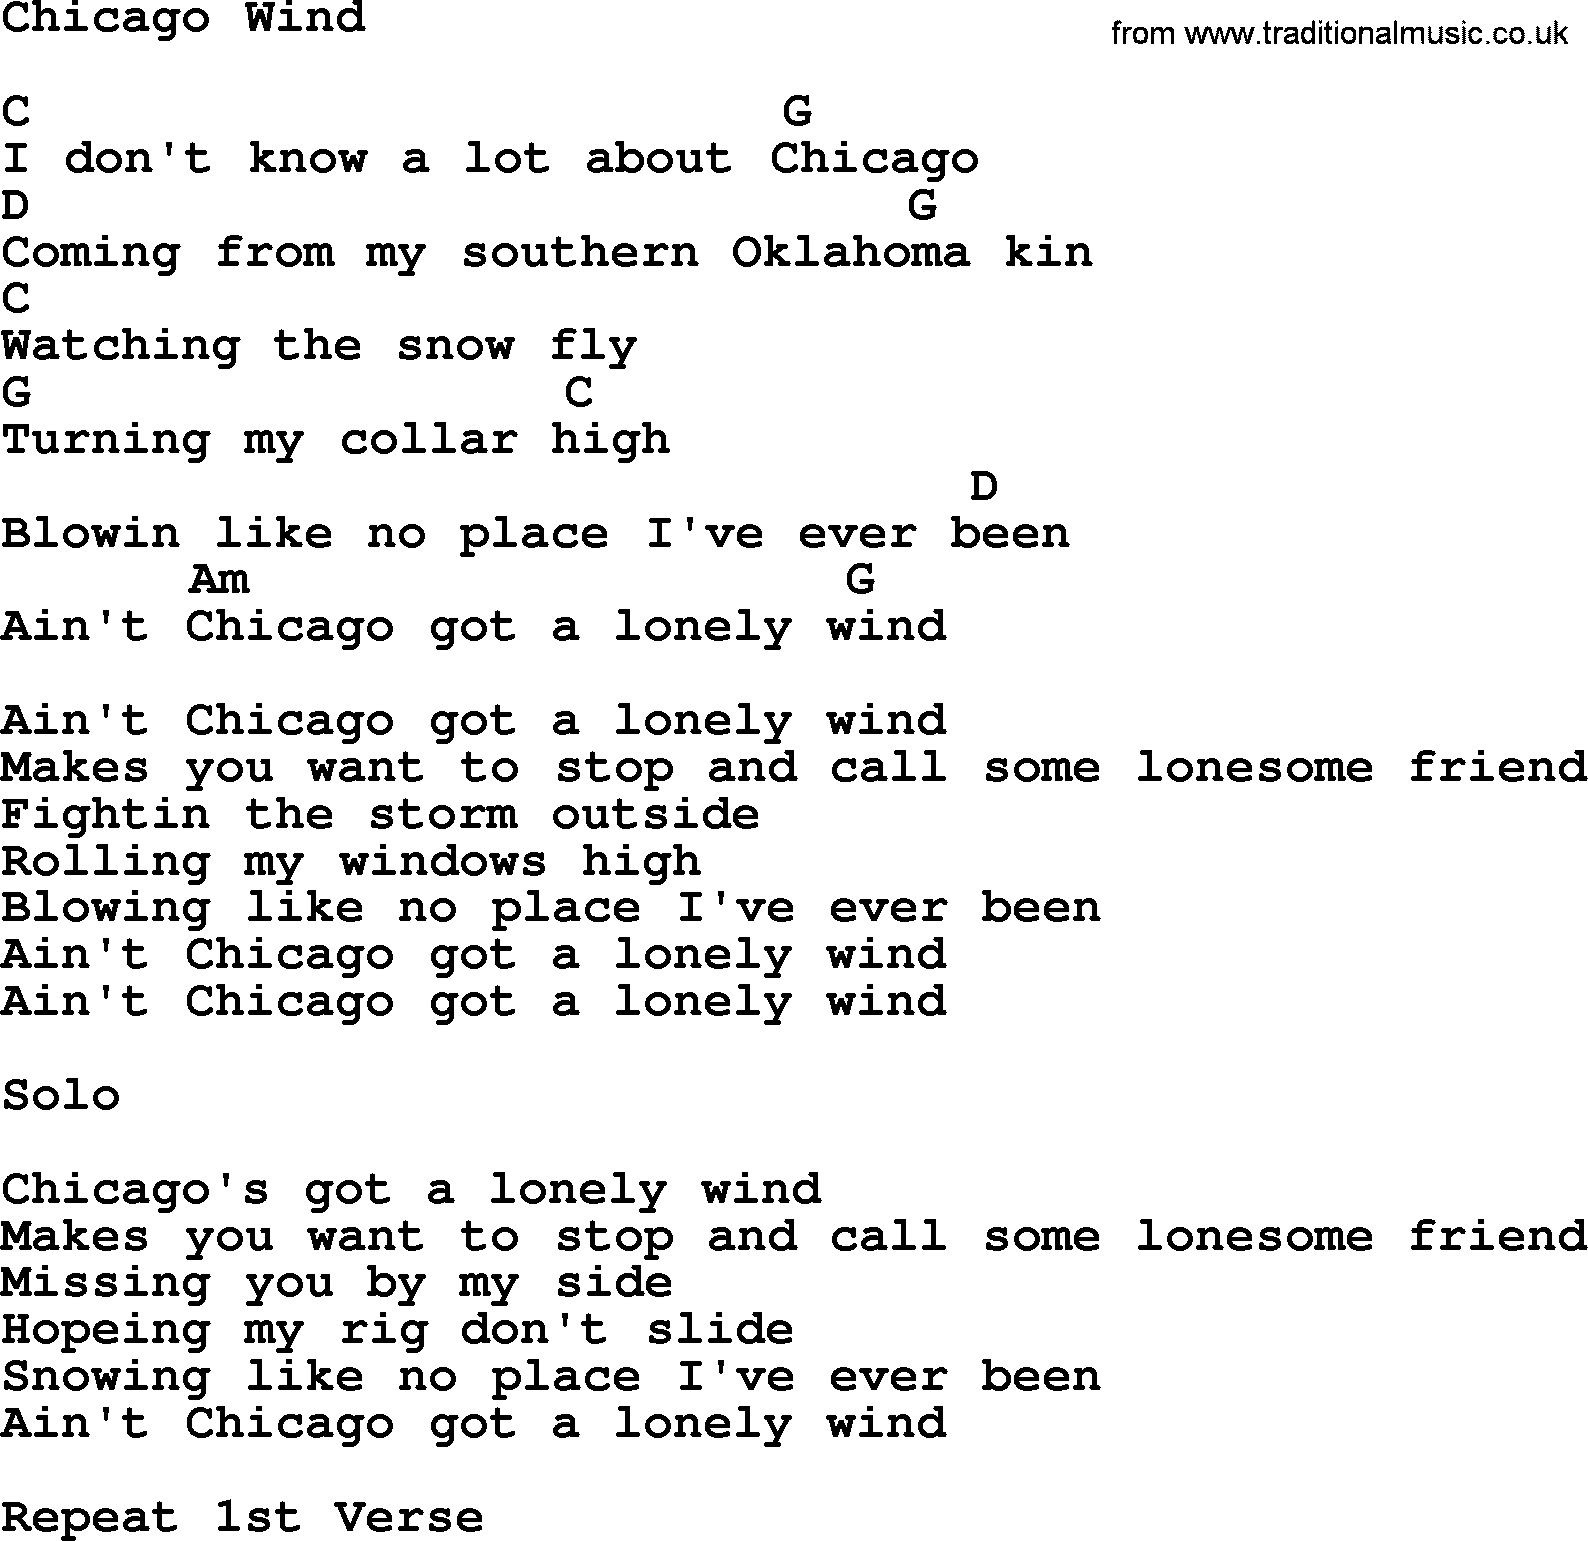 Merle Haggard song: Chicago Wind, lyrics and chords